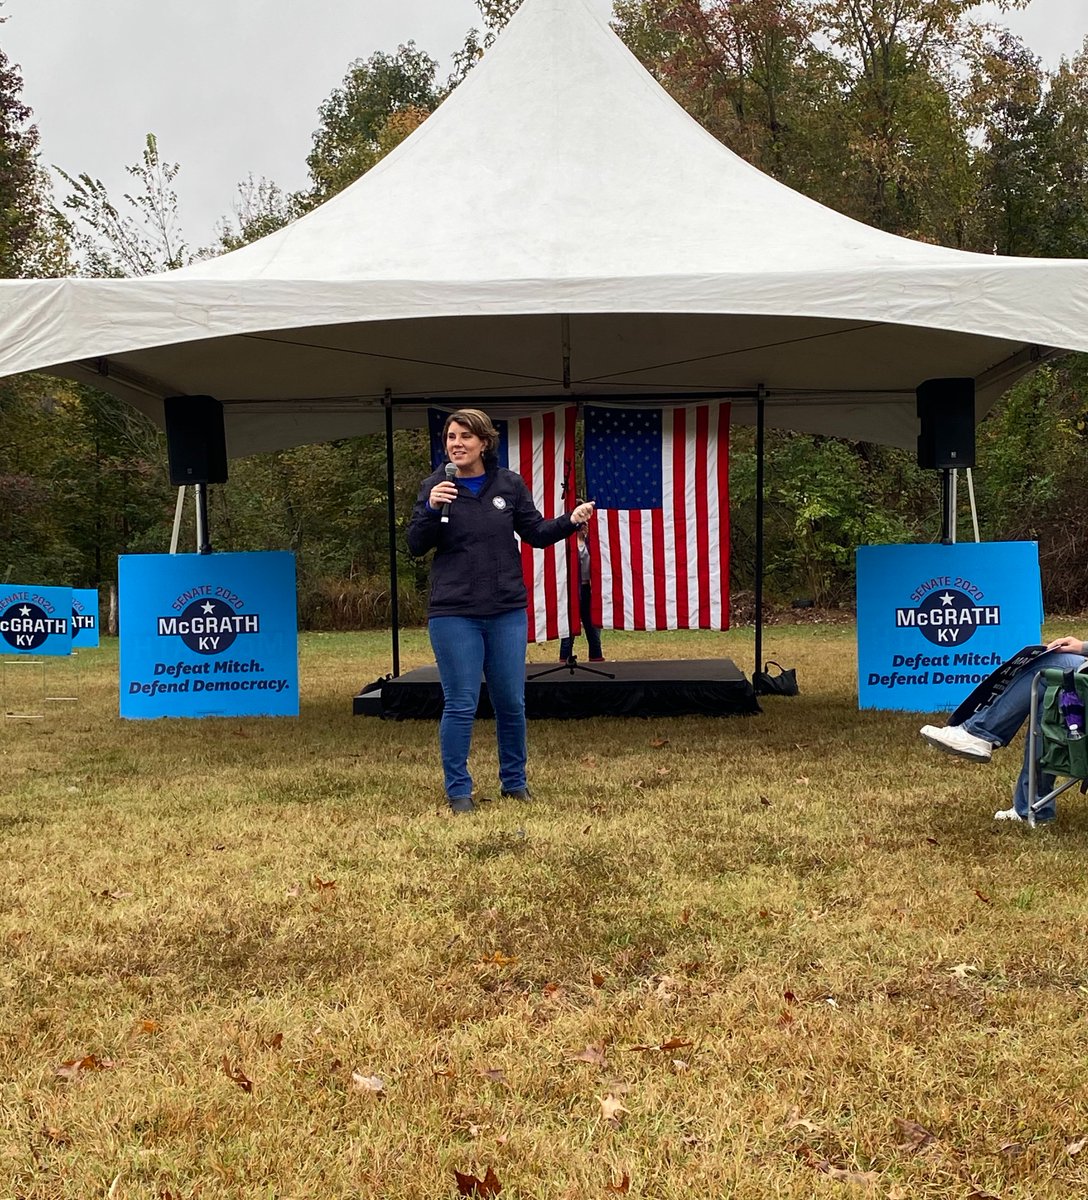 Thank you to everyone who came out in Bullitt County yesterday. Our gov't should prioritize support services for our troops & veterans, and rein in forever wars. I'll fight for child care and job opportunities for military families & work to protect, not privatize, the VA.